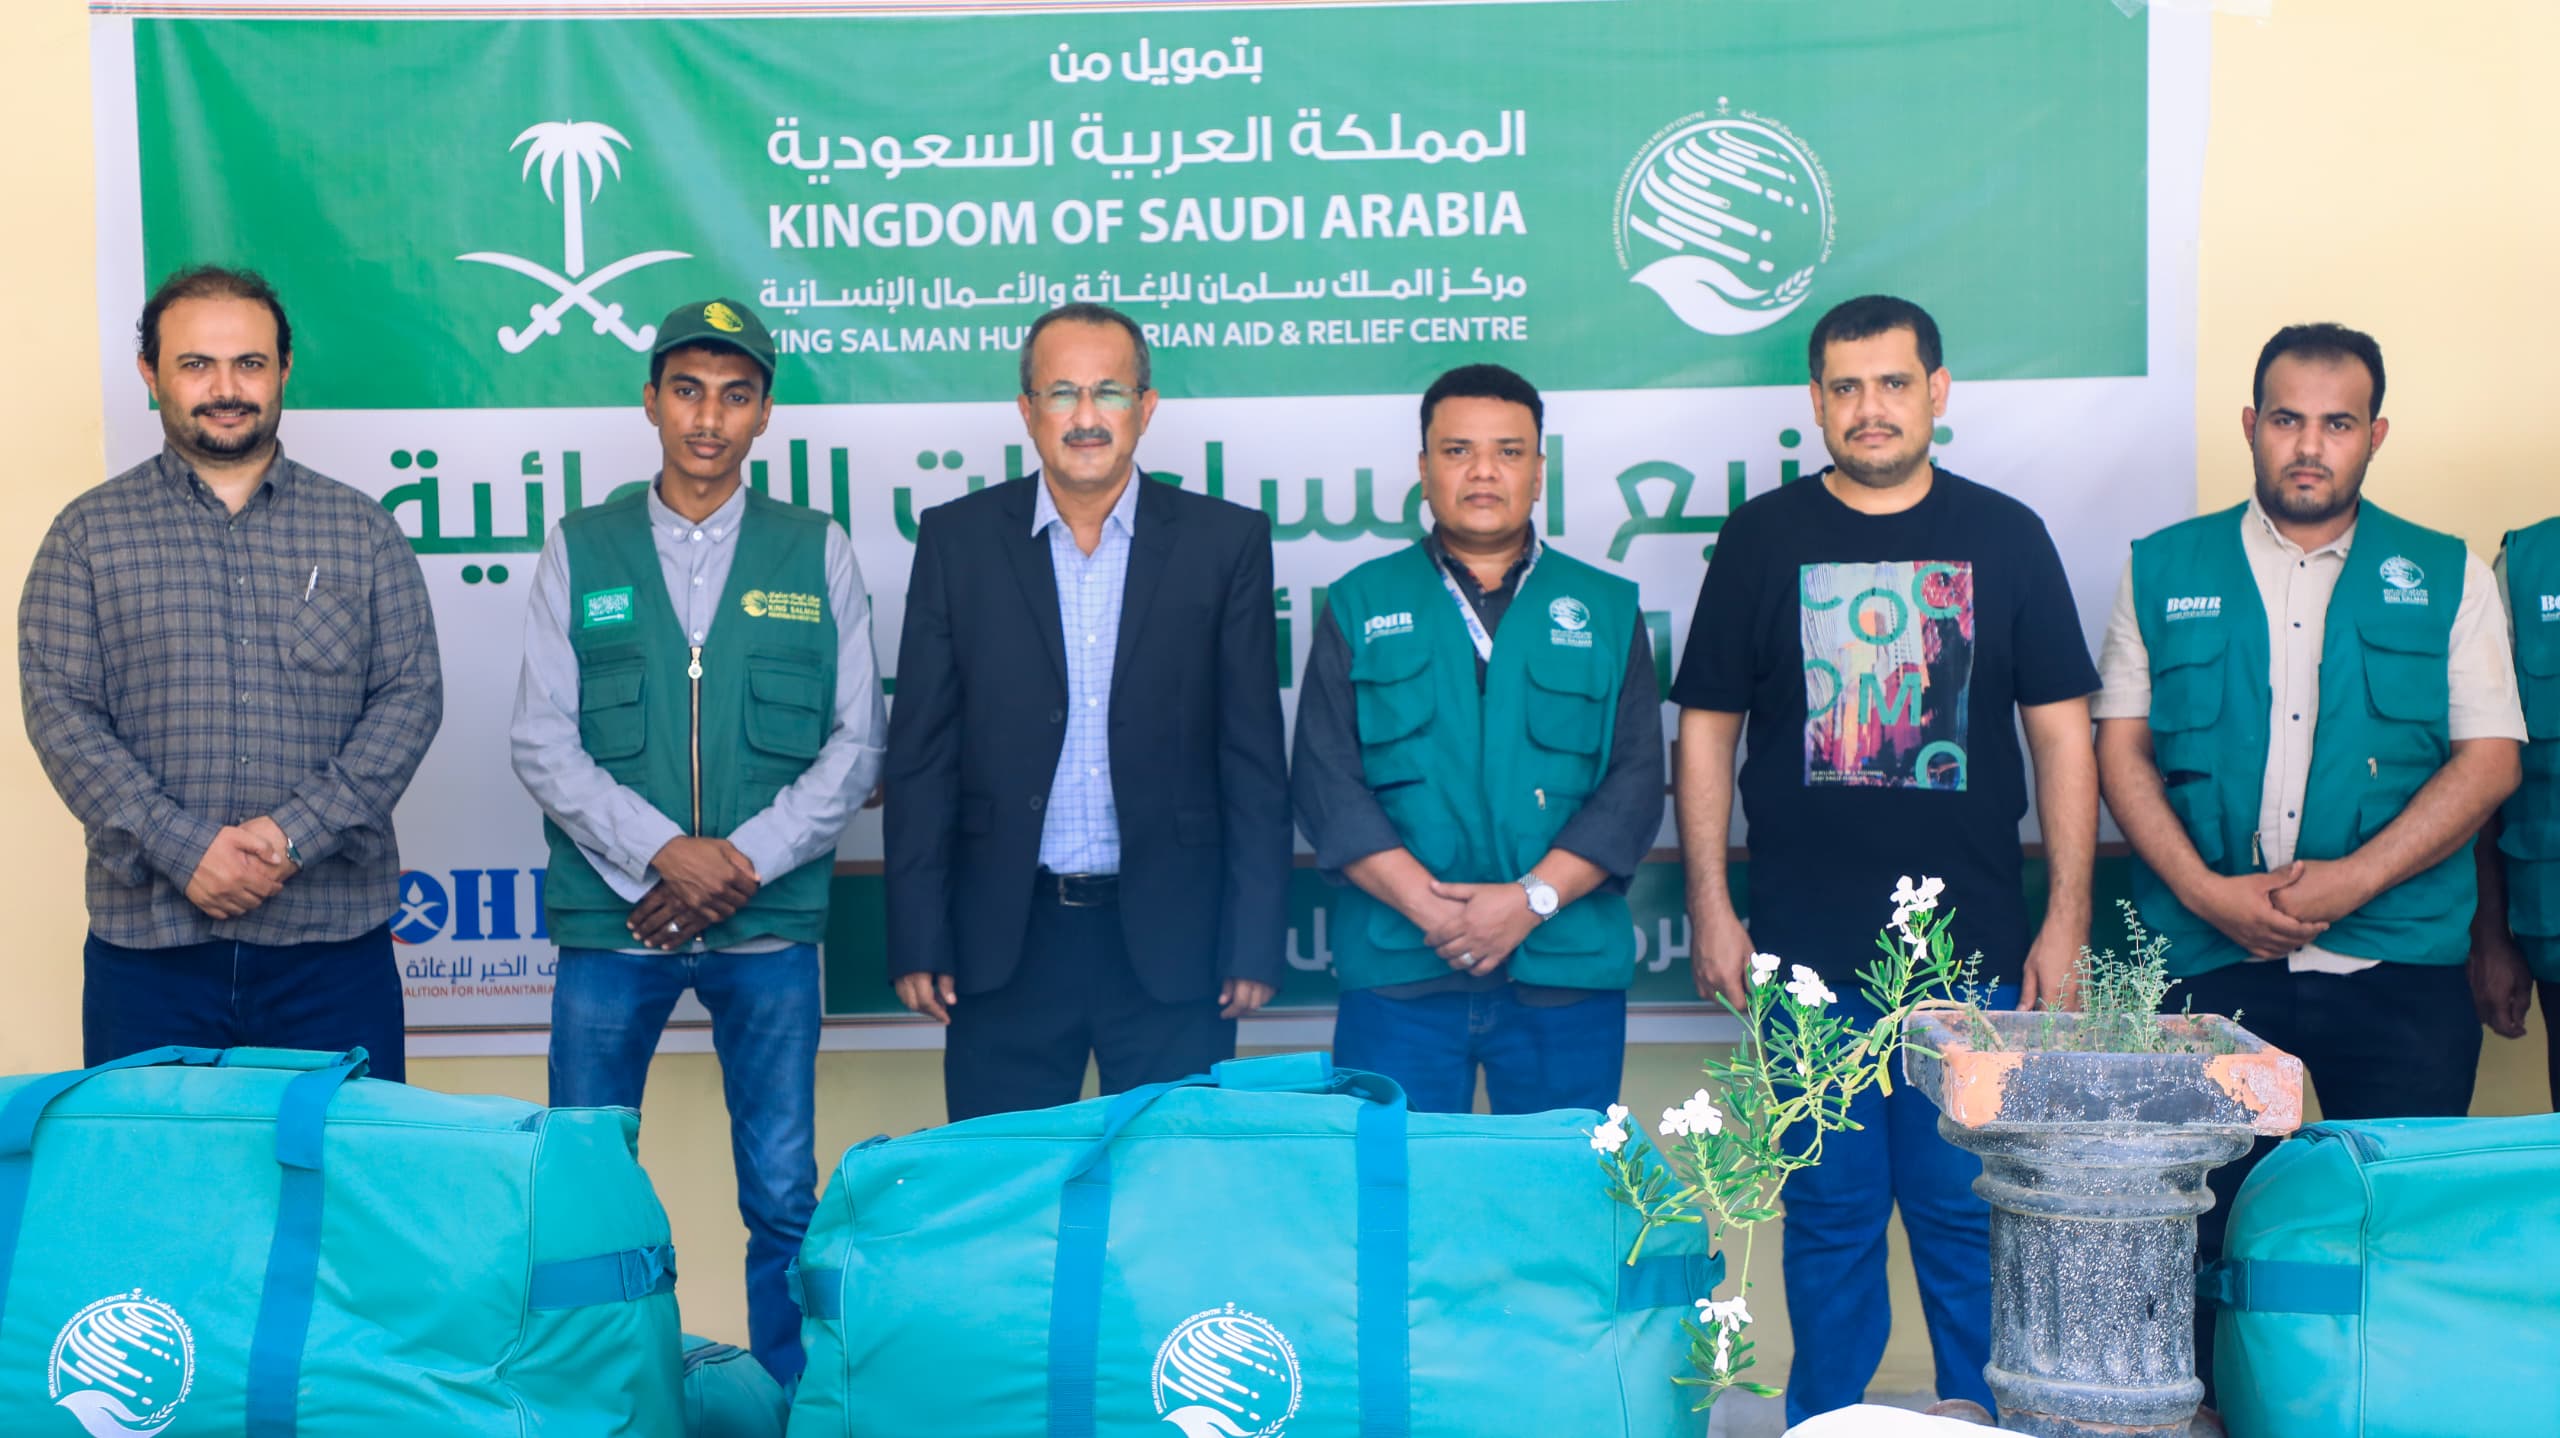 Distribution of Food and Shelter Aid to Rain and Flood-Affected People in Hadhramout Governorate